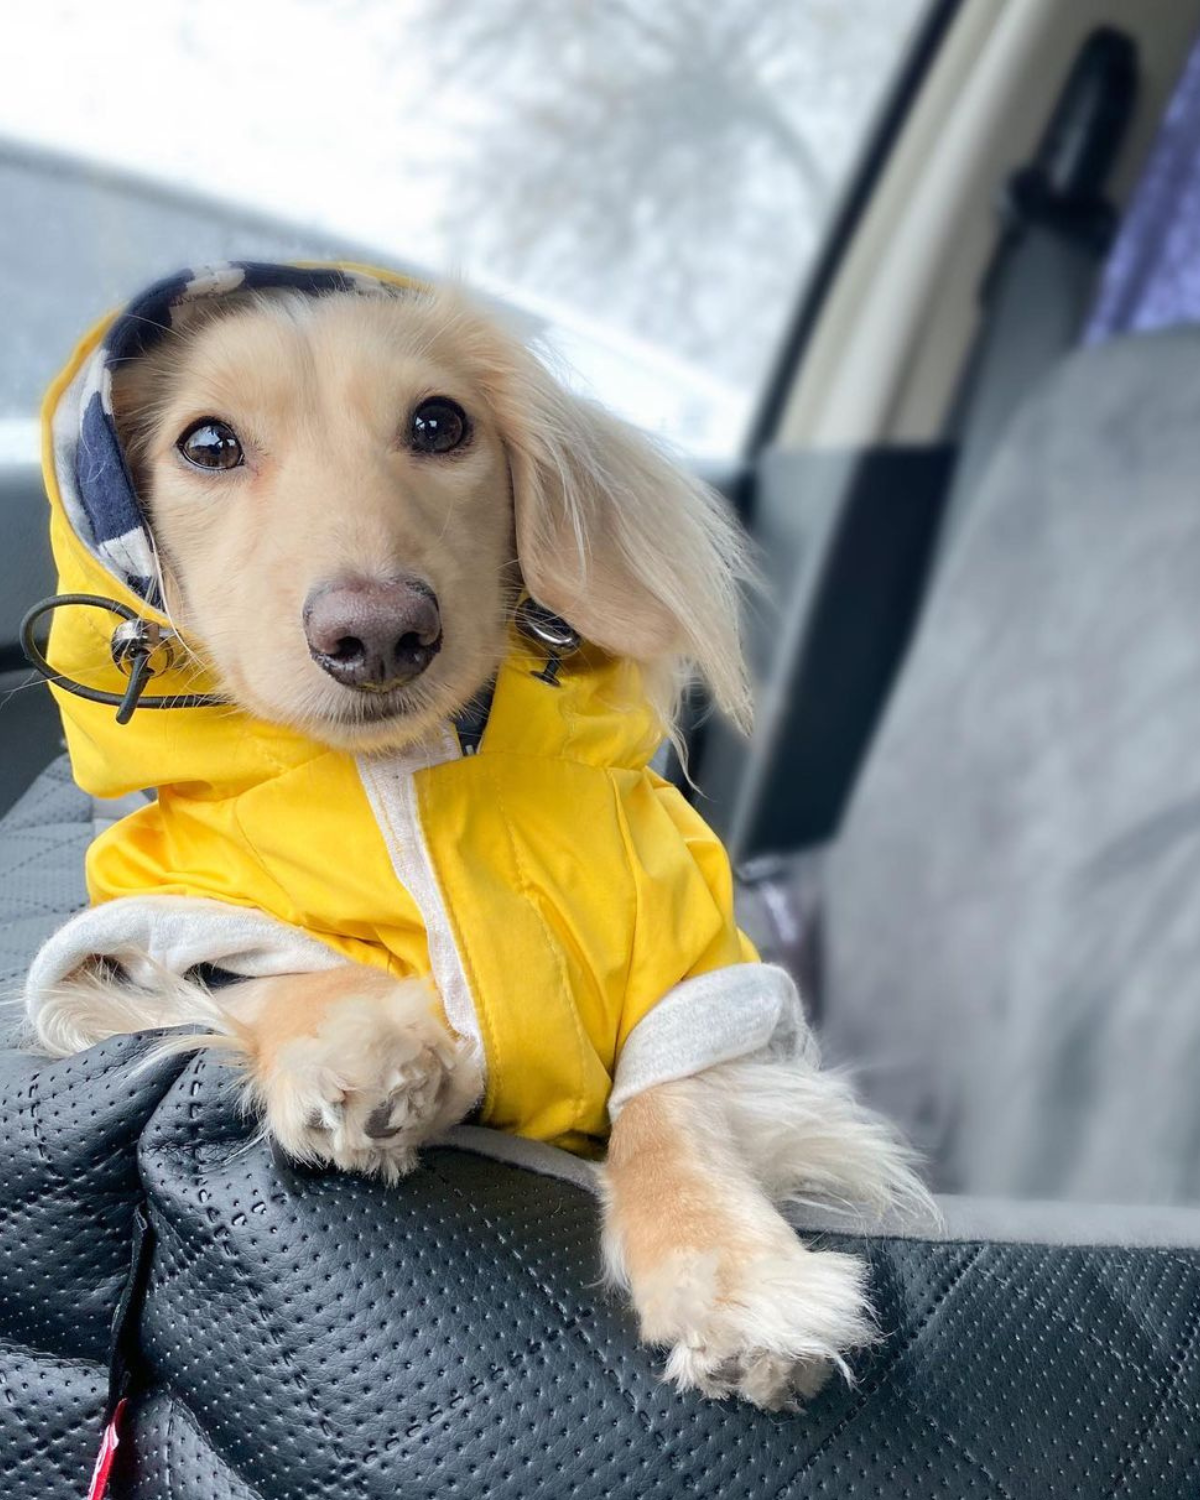 Pair your DJANGO dog hoodie with your favorite DJANGO dog coat and best winter dog jacket for extra warmth on the coldest winter days - djangobrand.com